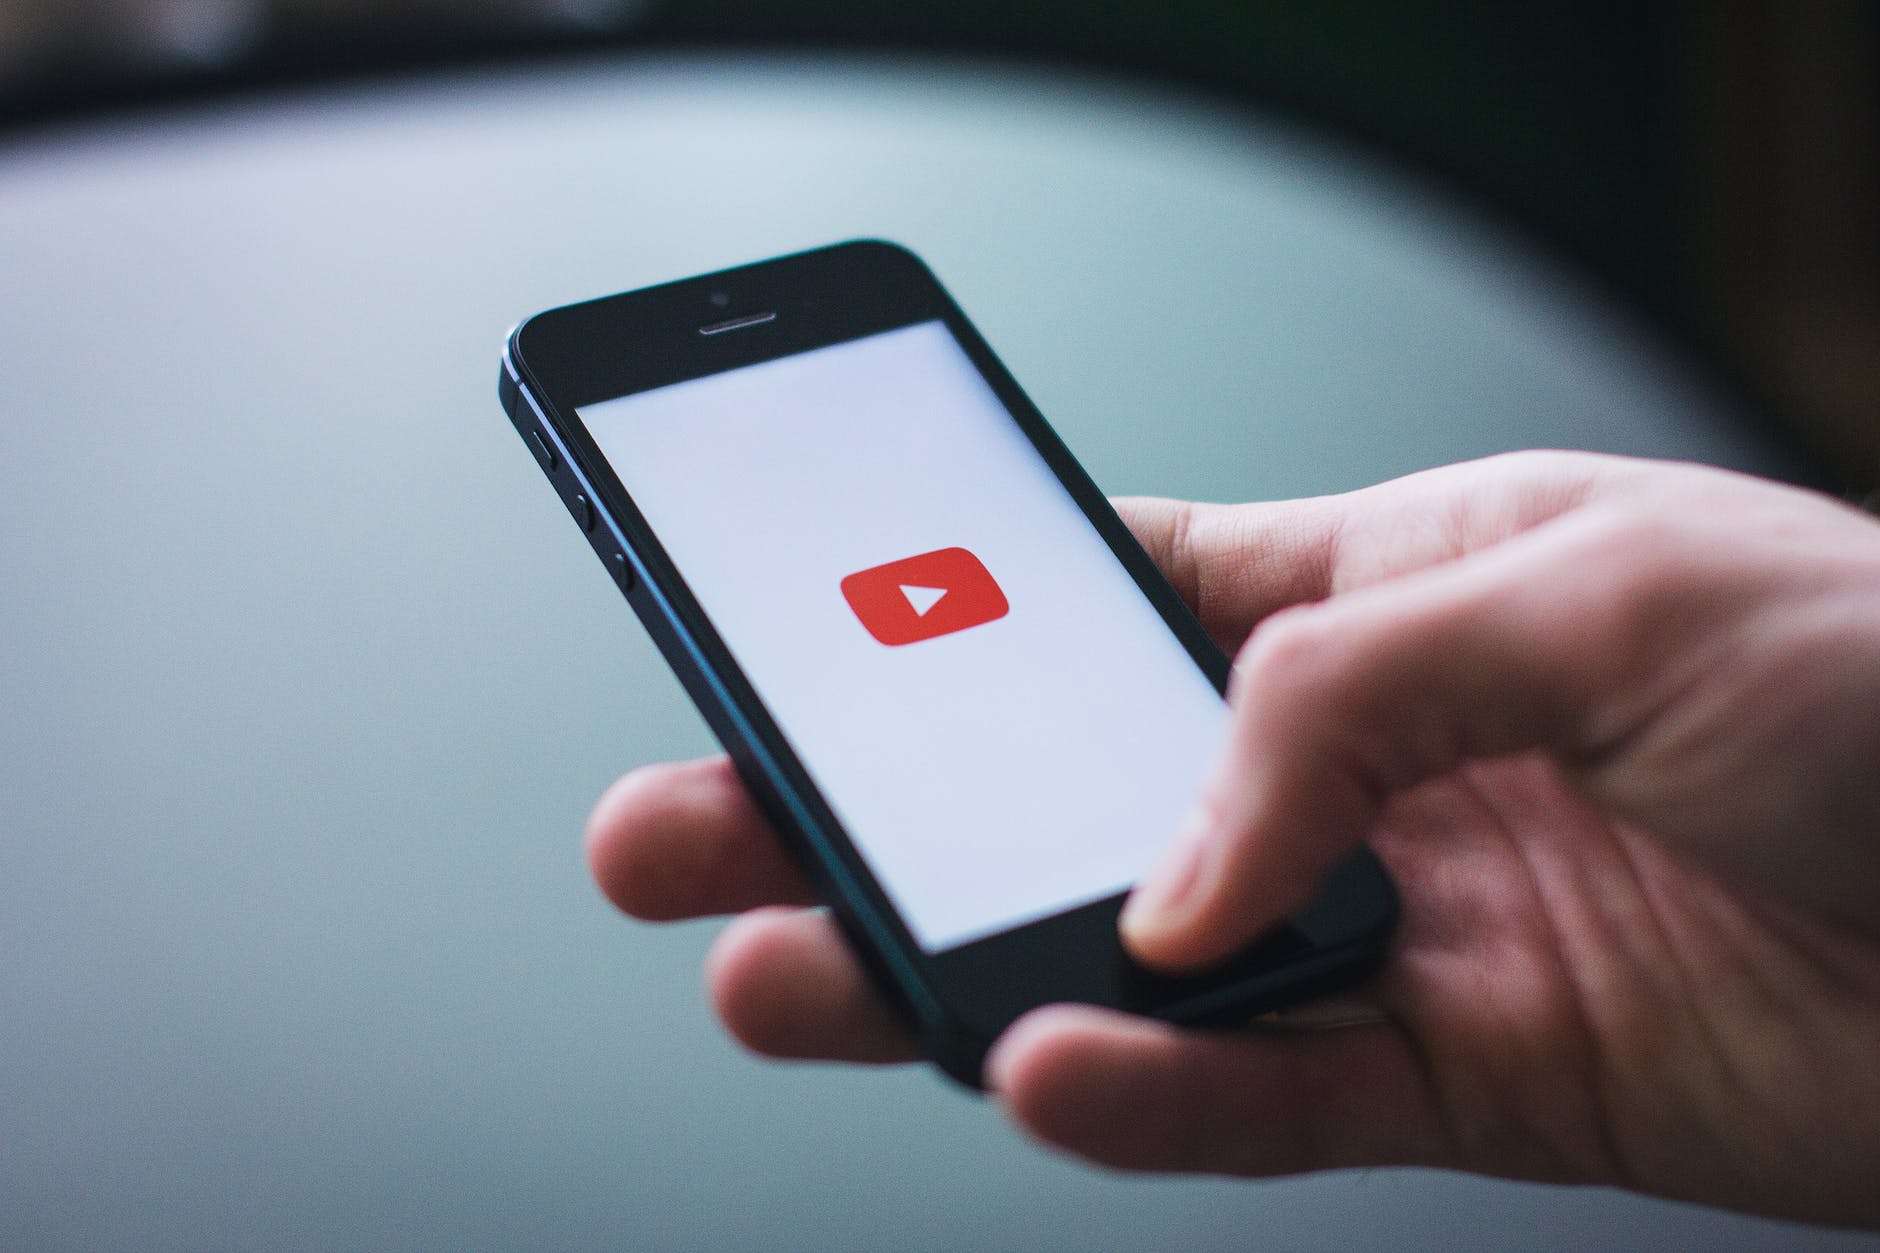 500 YouTube Subs Photo by freestocks.org on Pexels.com